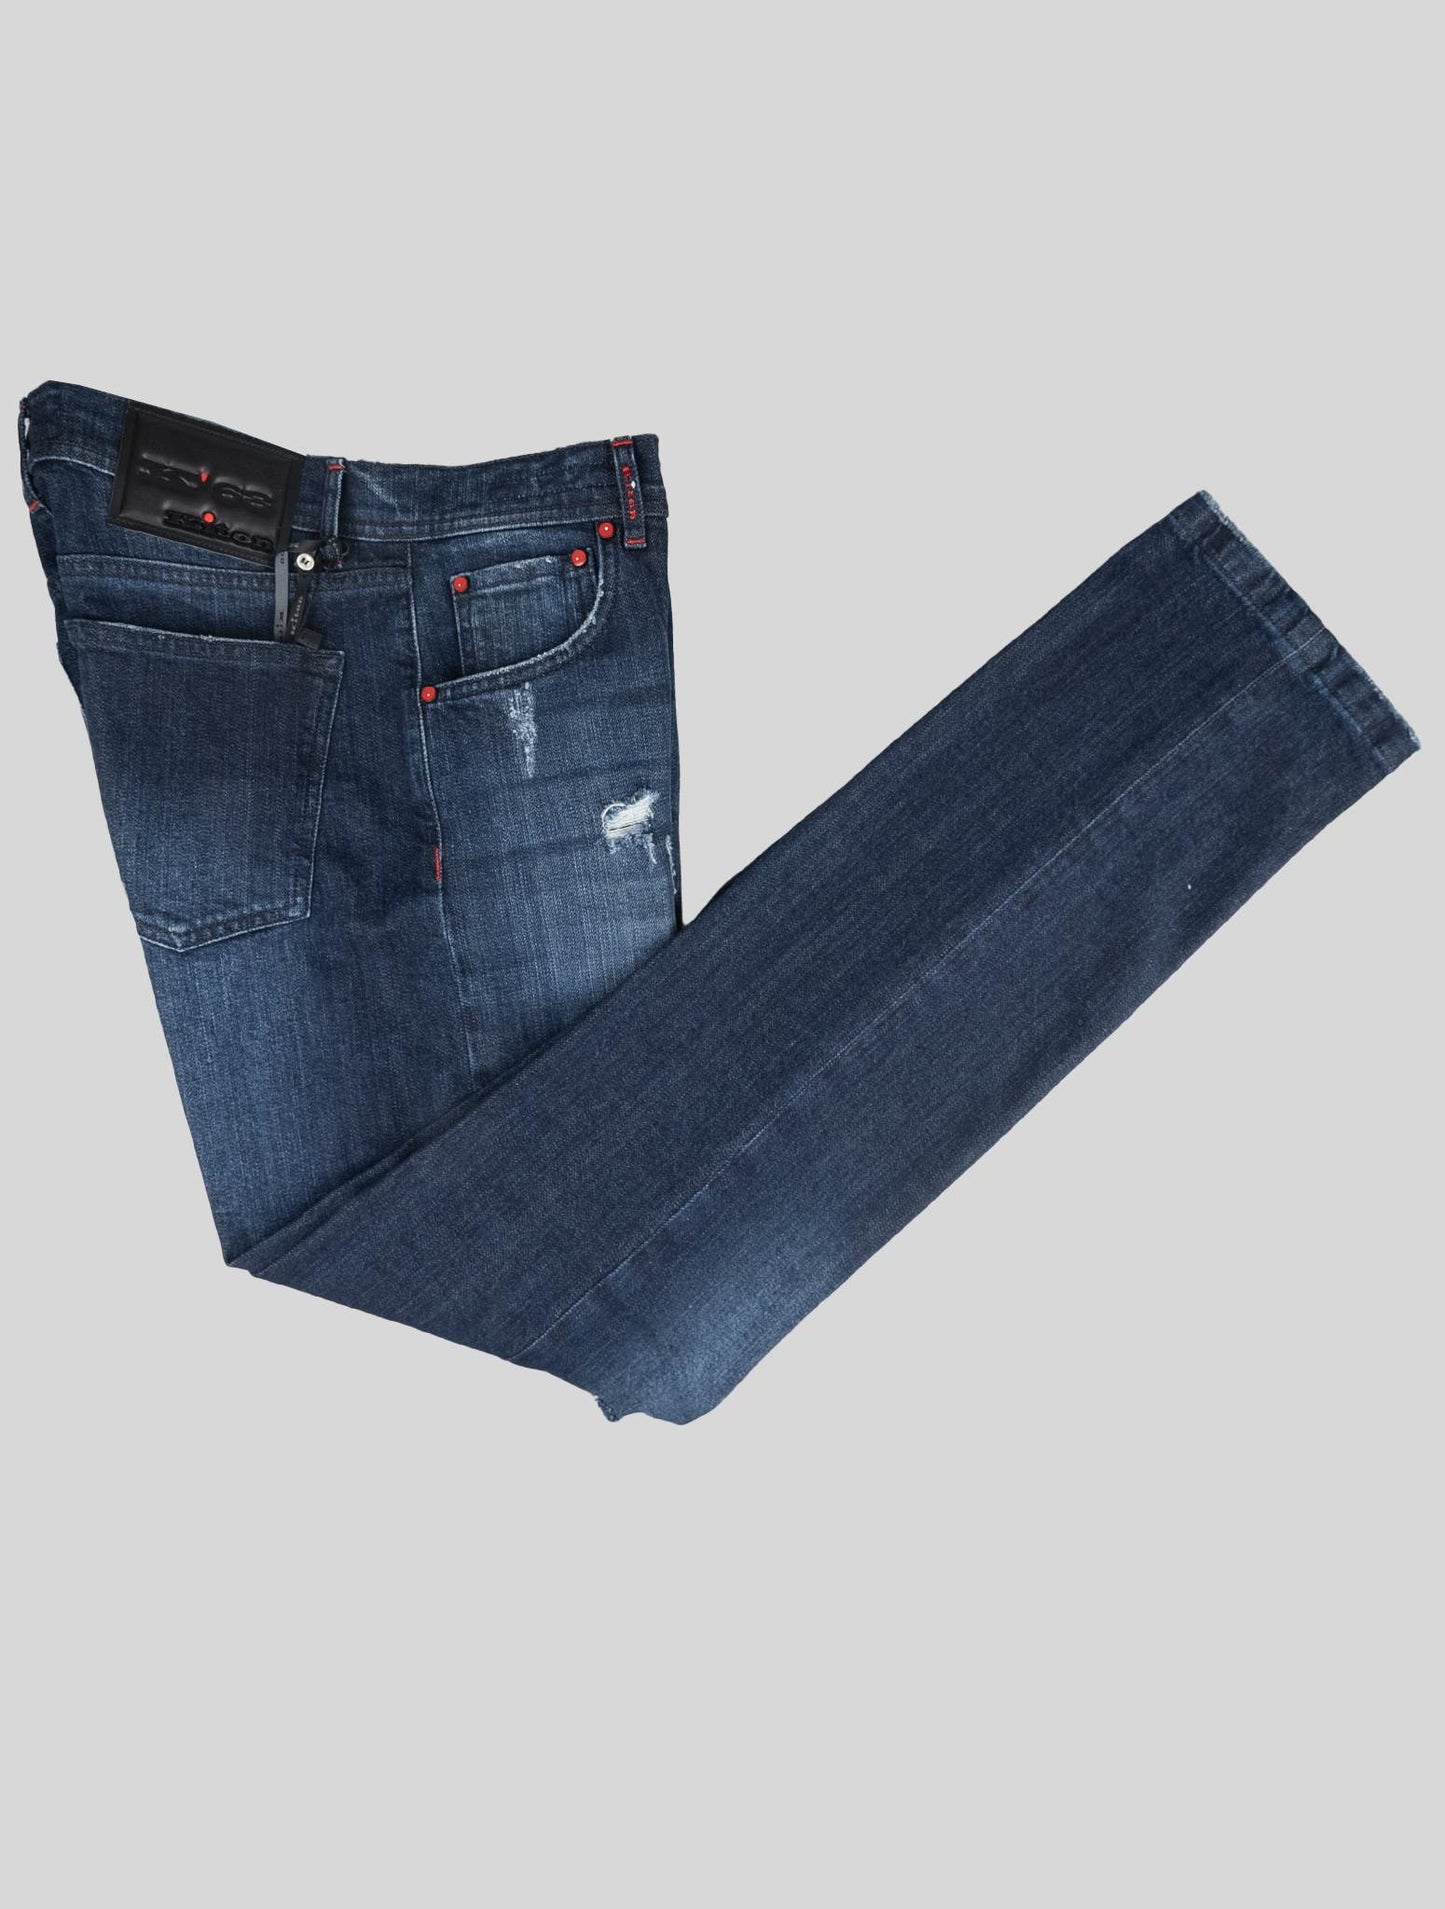 Kiton Blue Cotton Ea Jeans Limited Edition 12 of 22